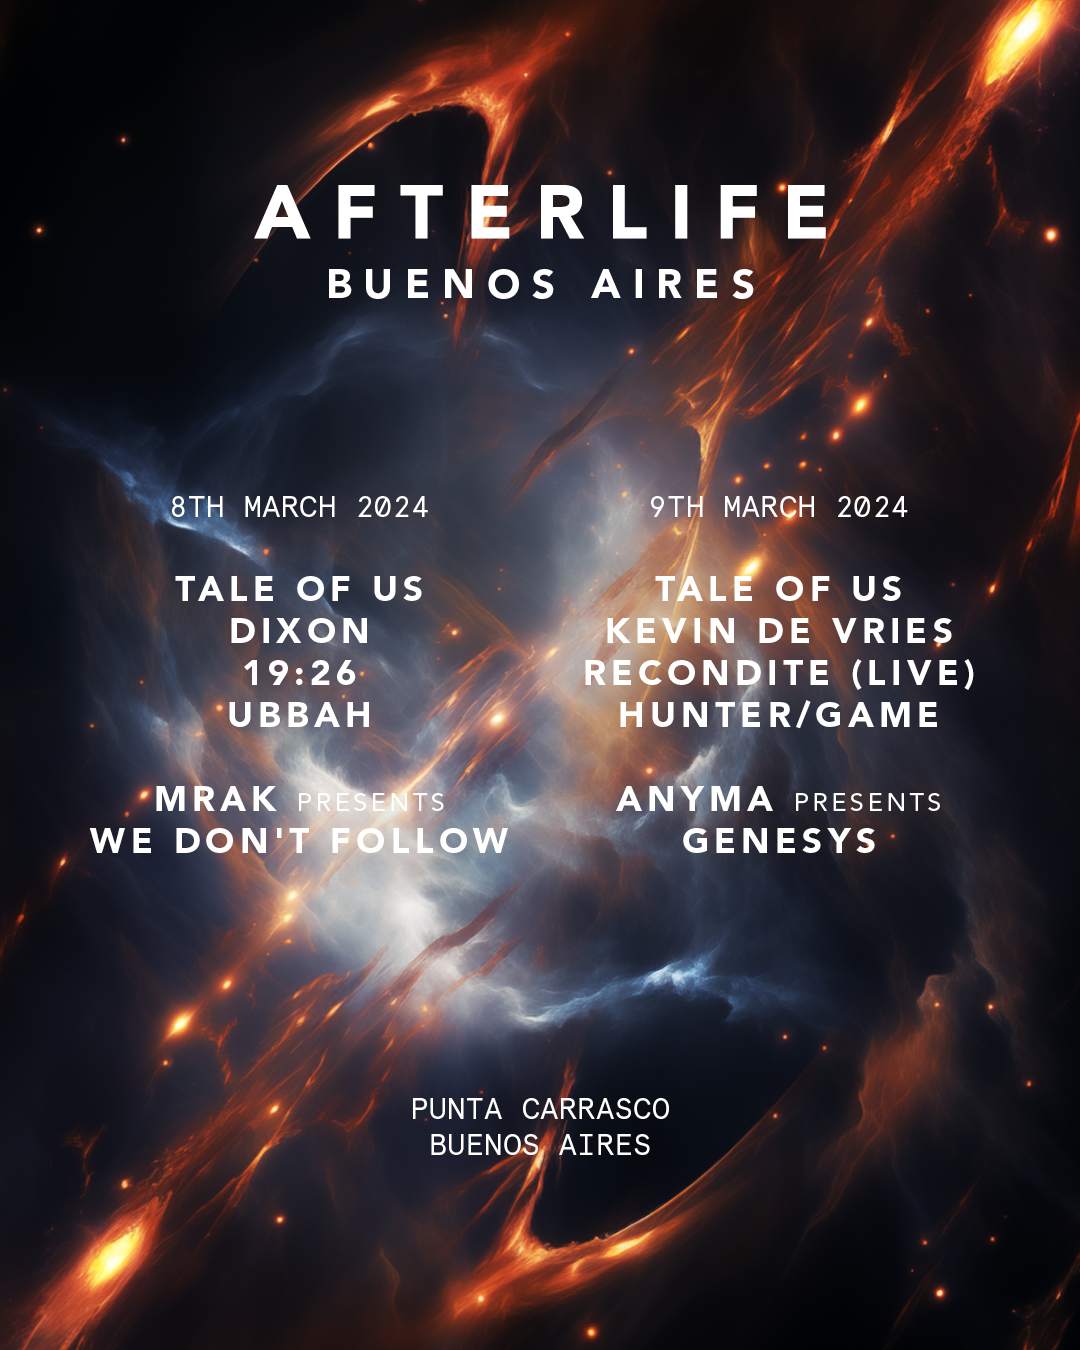 Afterlife Buenos Aires 2024 - フライヤー裏